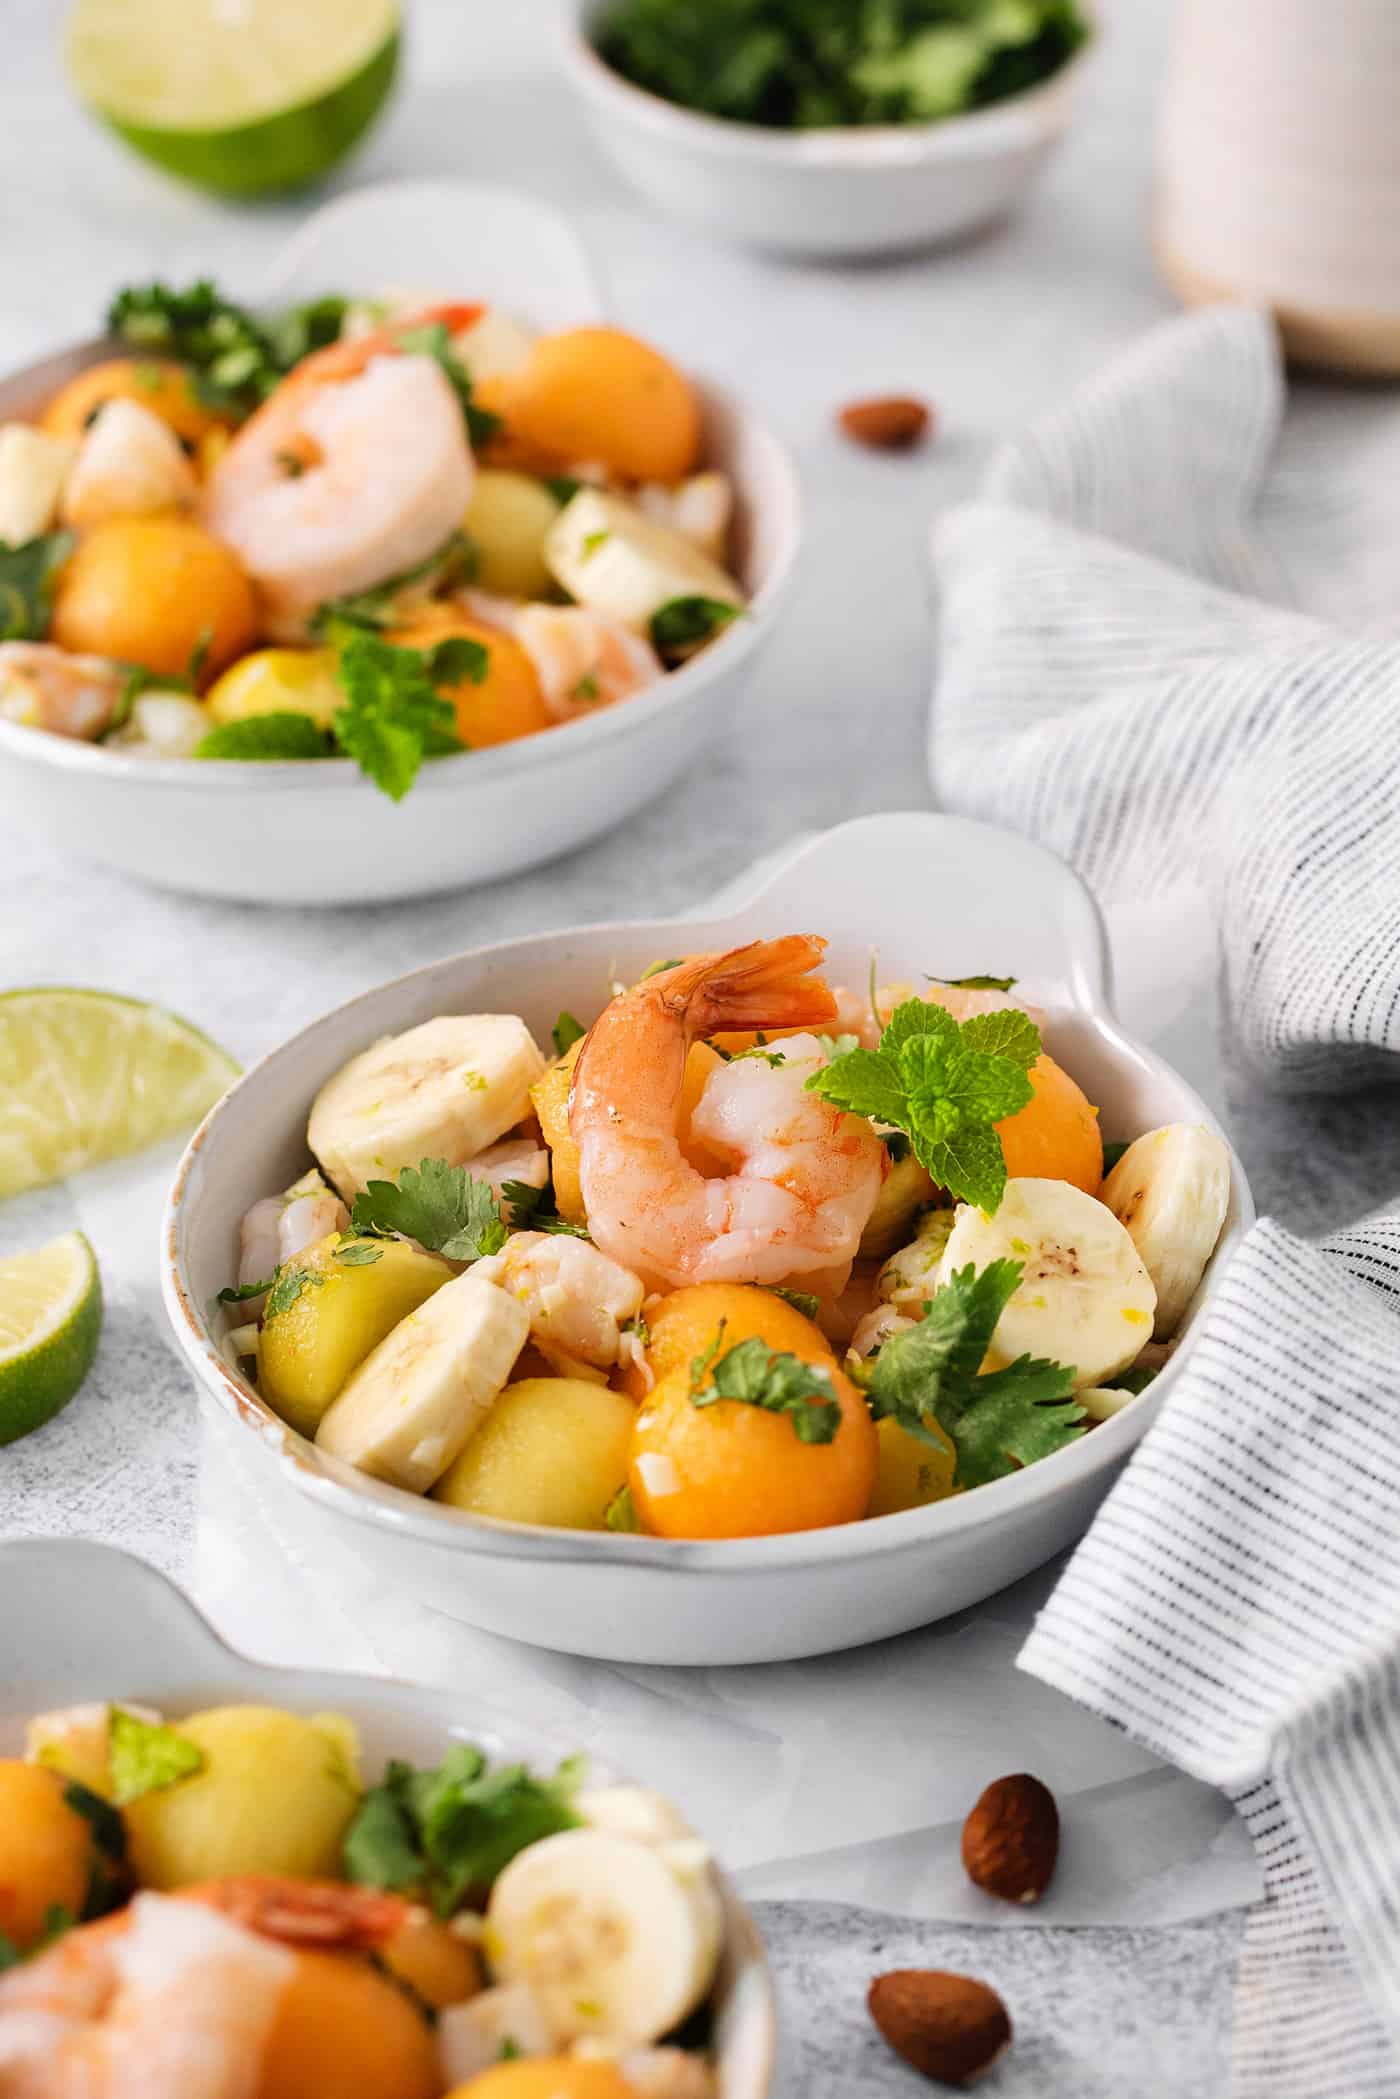 Colorful bowls of tropical shrimp salad with fruit, shrimp, and mint leaves and limes on the side are shown on a table with napkins.